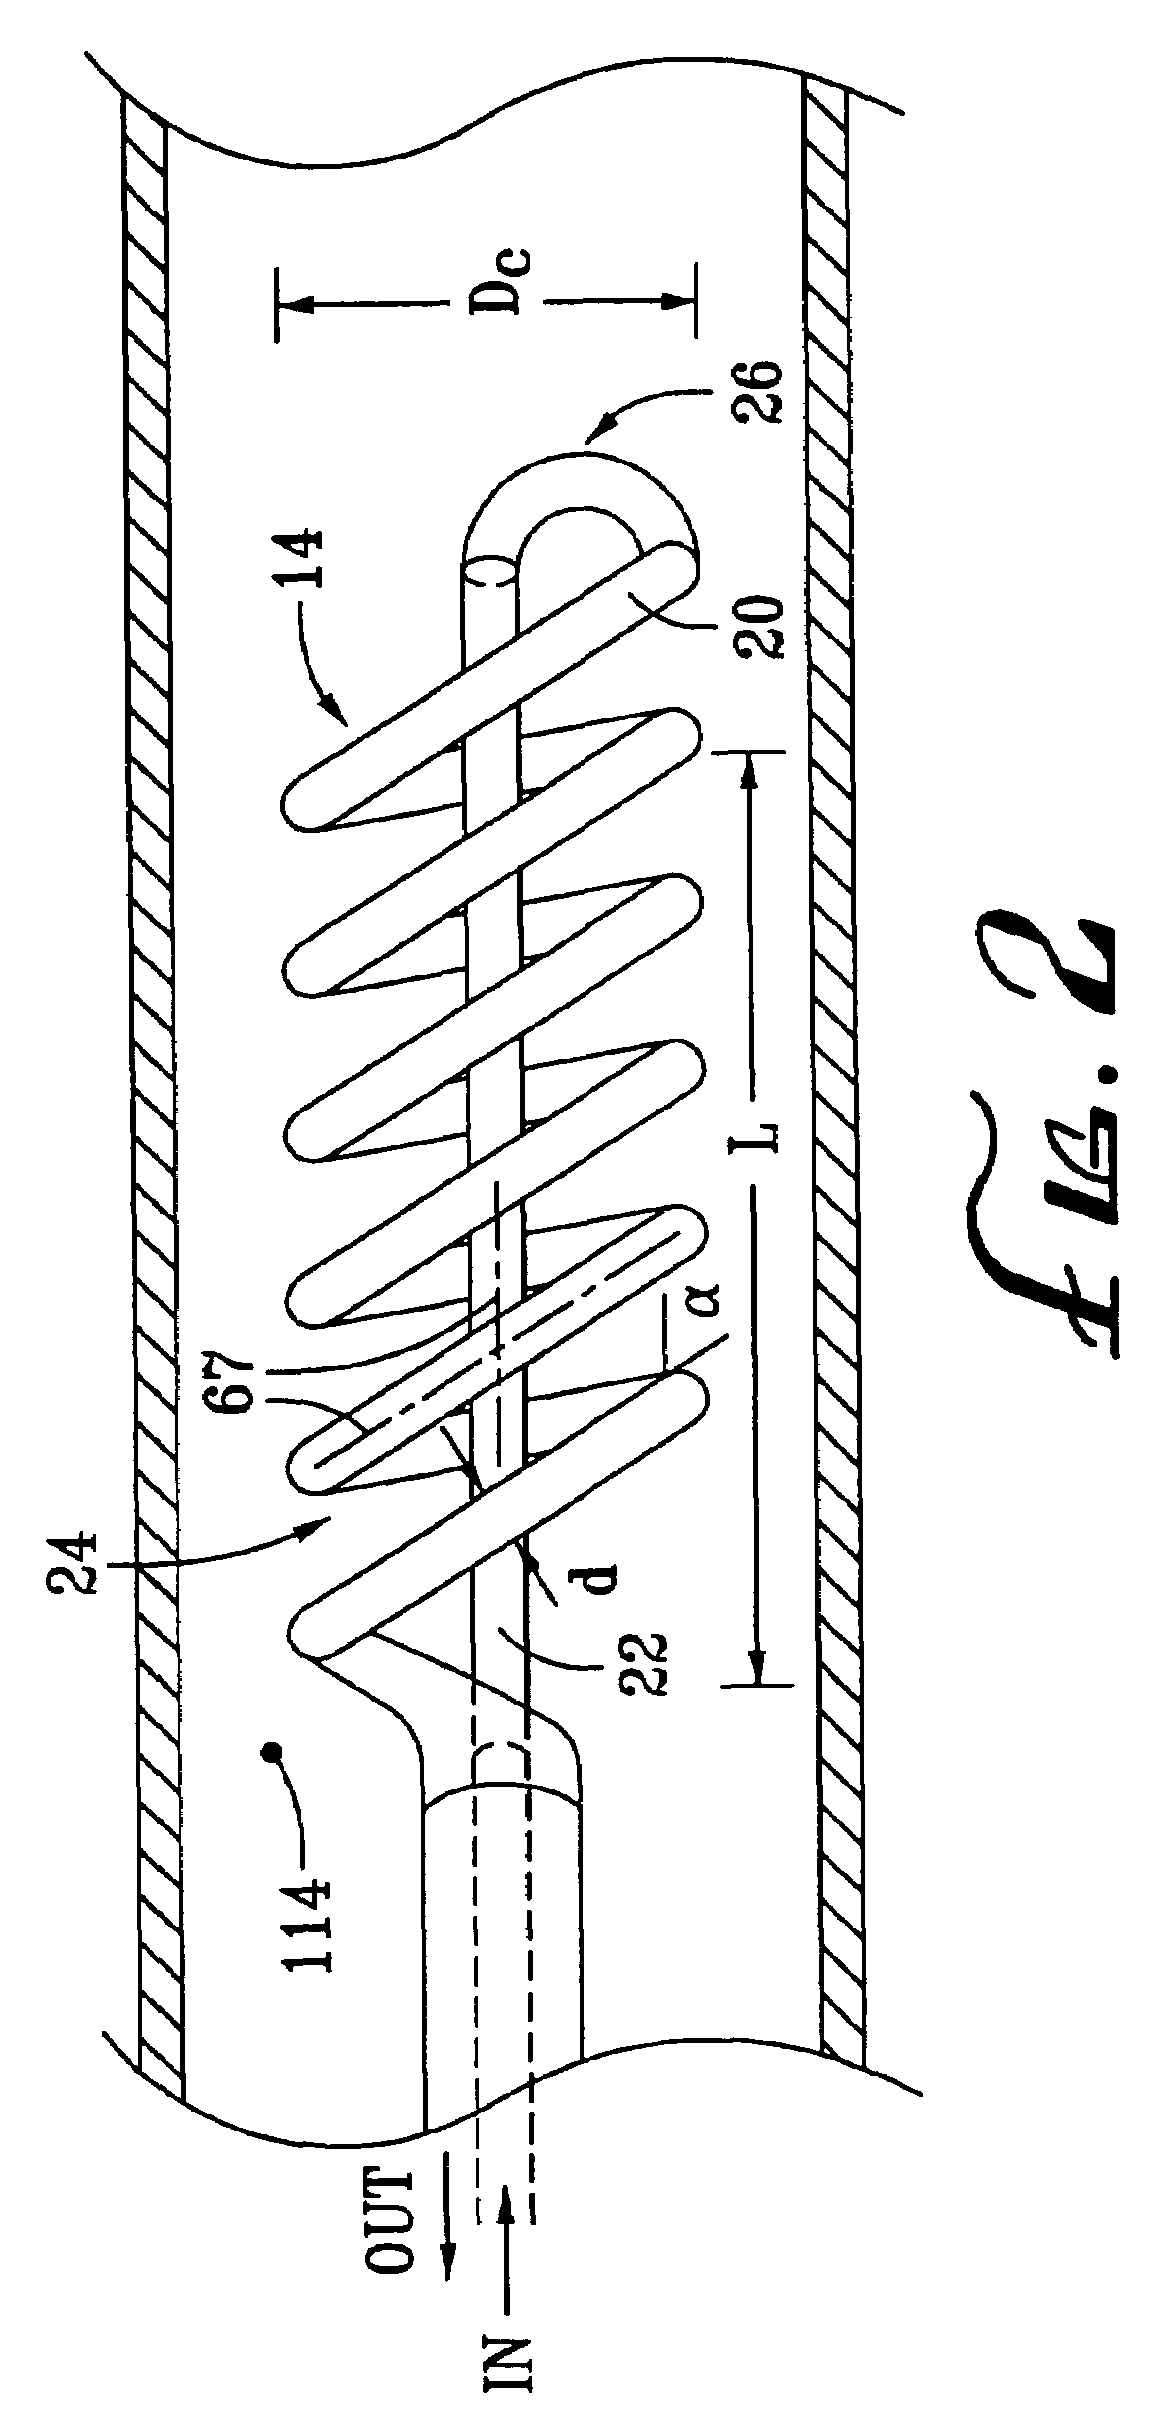 Inflatable catheter for selective organ heating and cooling and method of using the same